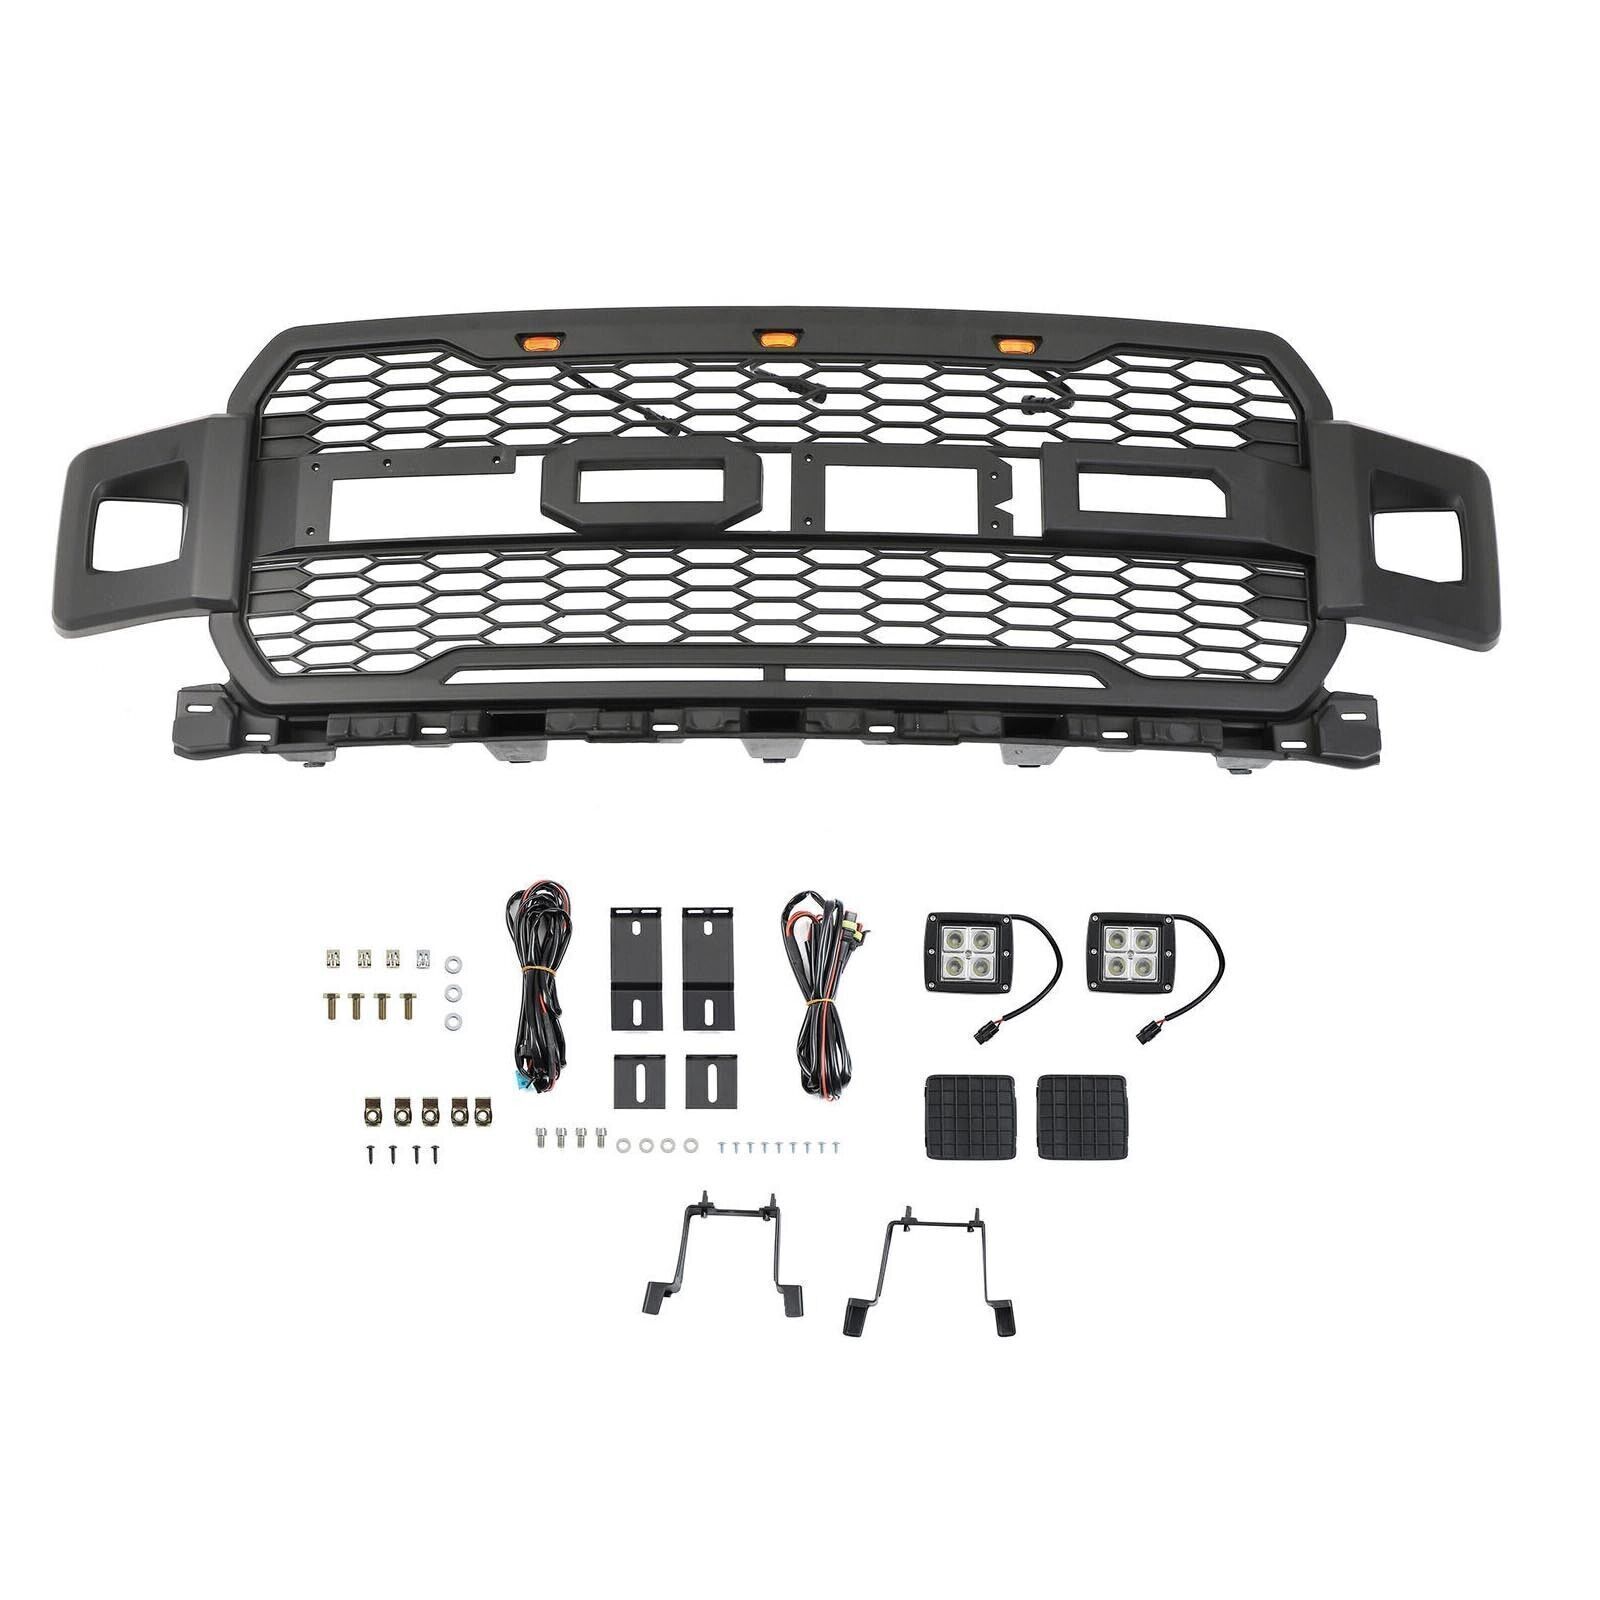 Front Grille Light Fits For F250 F350 F450 F550 Super Duty 2017-19 Raptor Style